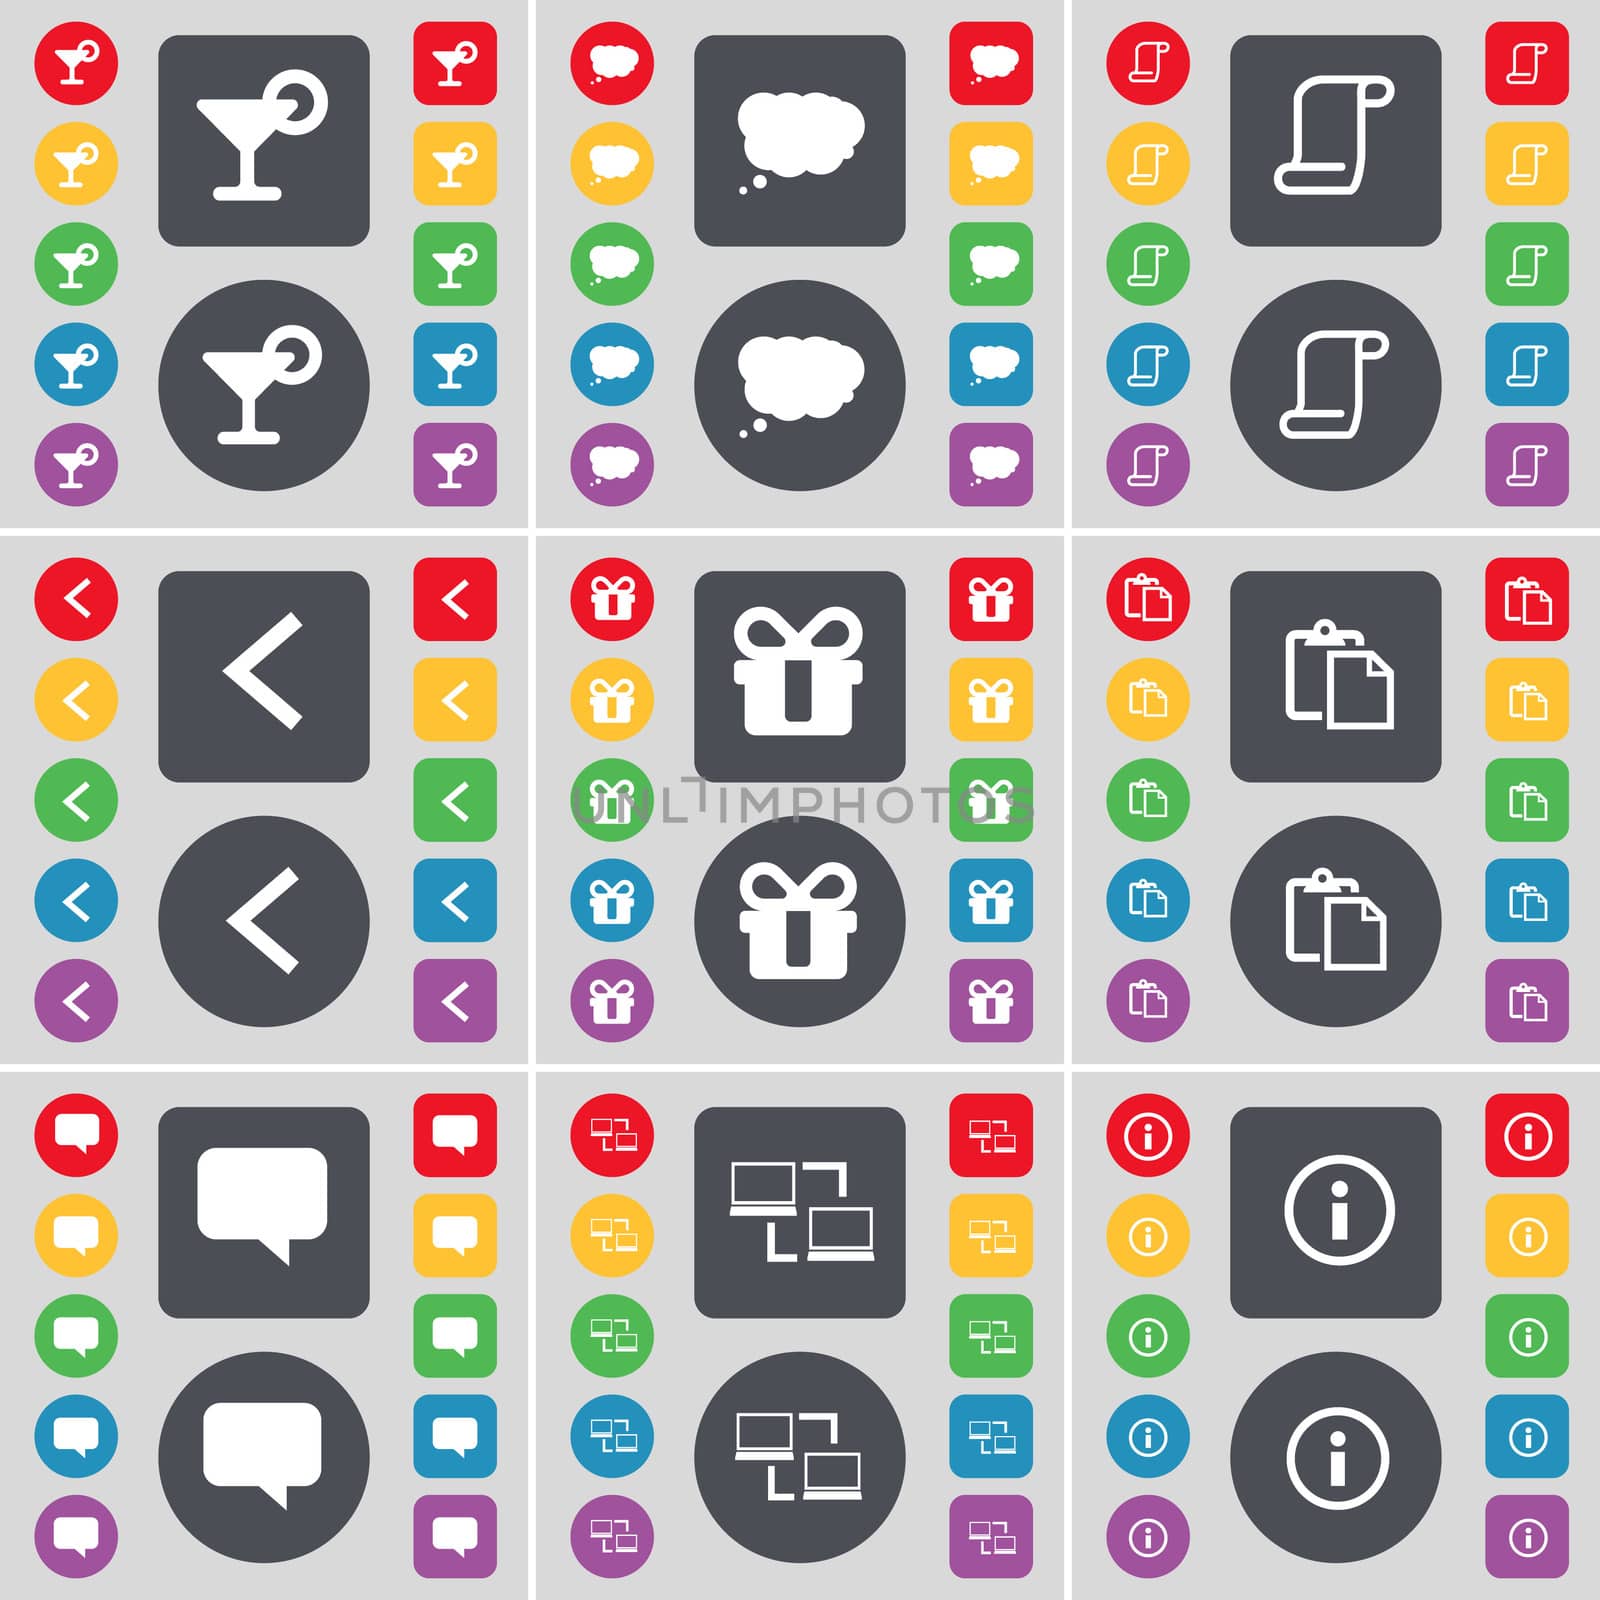 Cocktail, Chat cloud, Scroll, Arrow left, Gift, Survey, Chat bubble, Connection, Information icon symbol. A large set of flat, colored buttons for your design. illustration